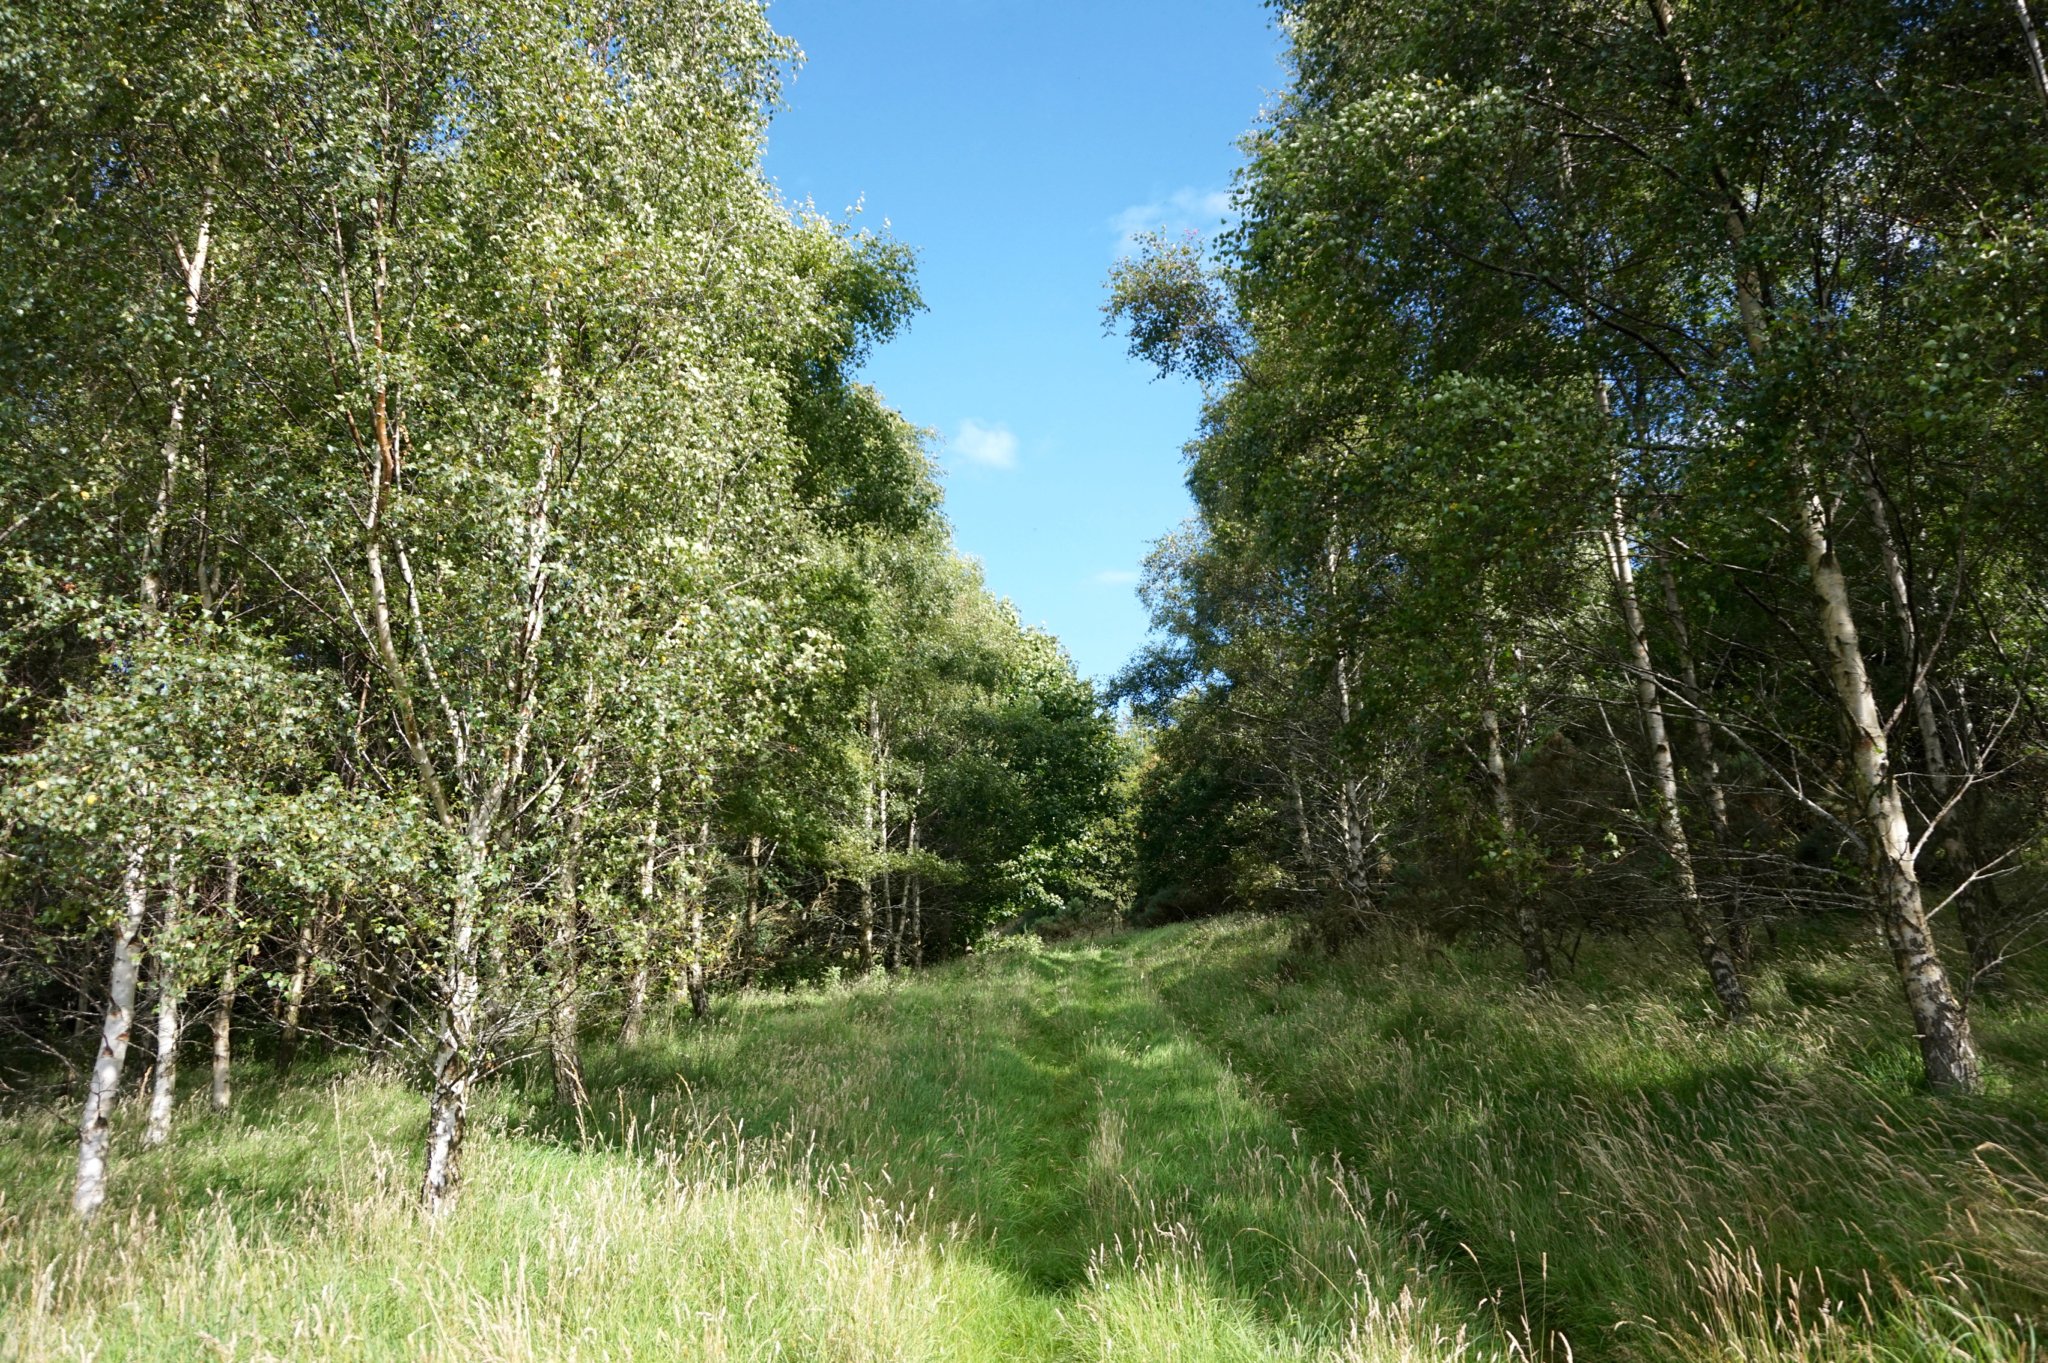 A trail through a forest just outside the village of Nigg